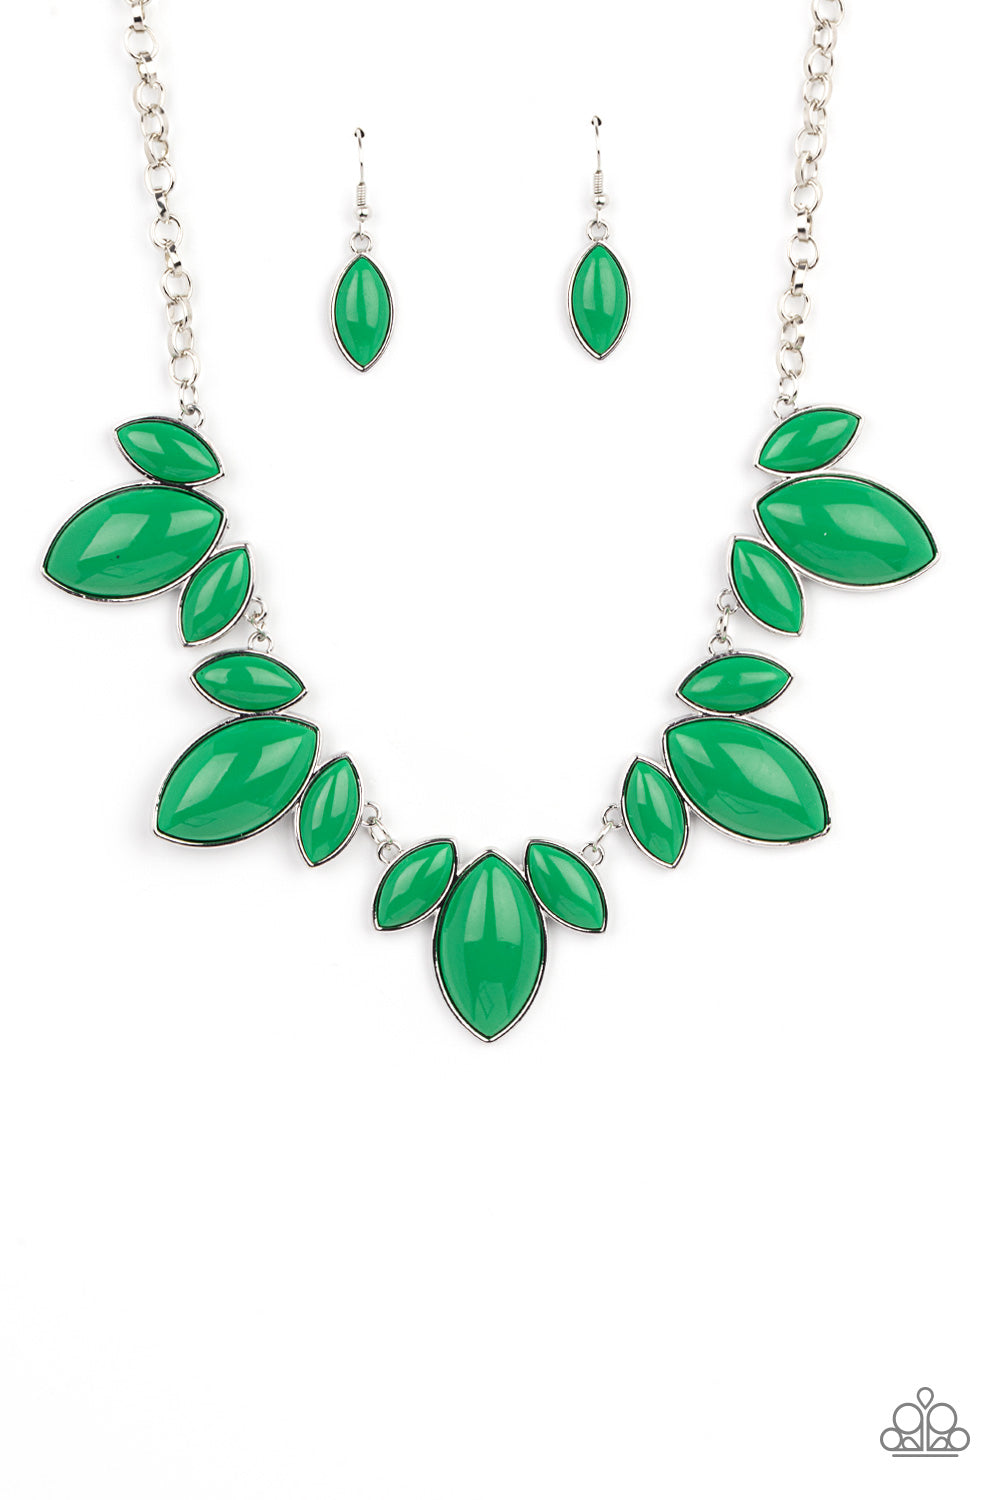 Paparazzi - Delectable Daydream - Green Necklace | Fashion Fabulous Jewelry